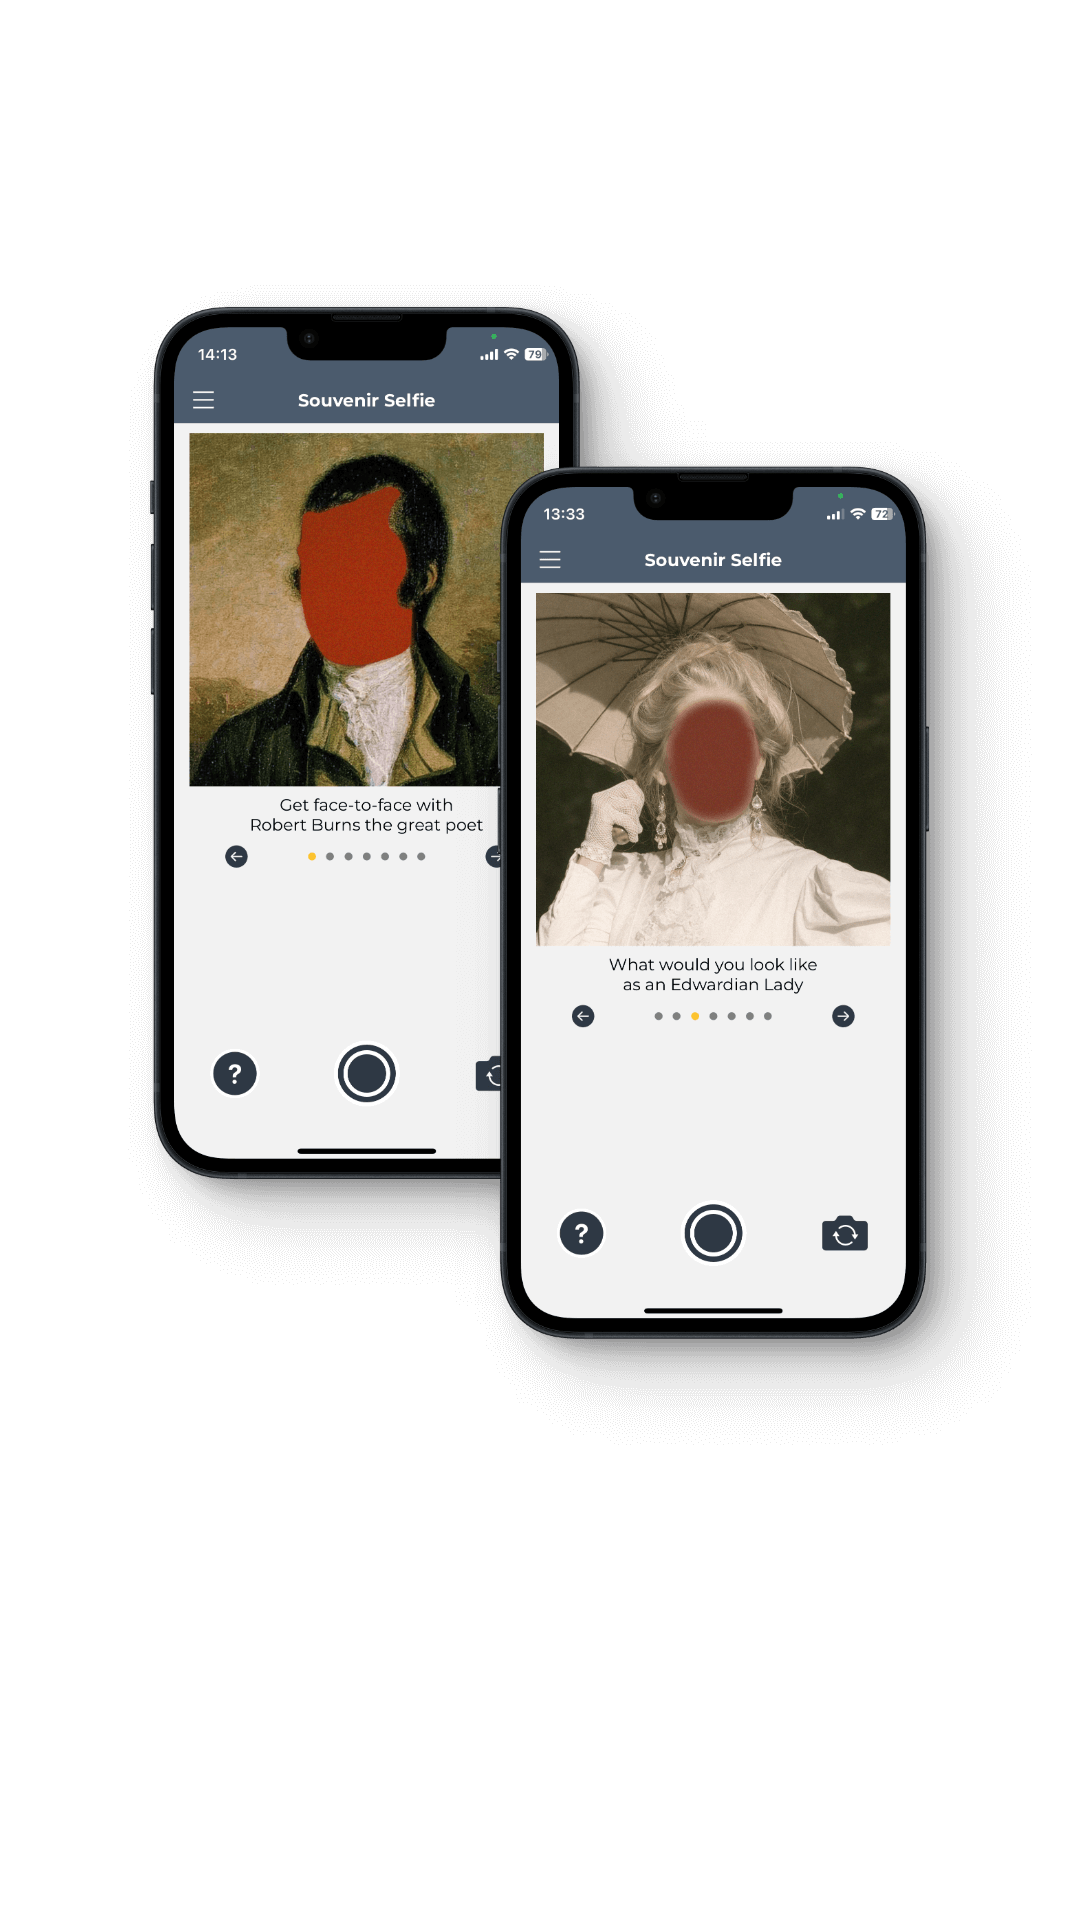 IPad with Ayr Through the Ages App loaded showing the Souvenir Selfie Screen